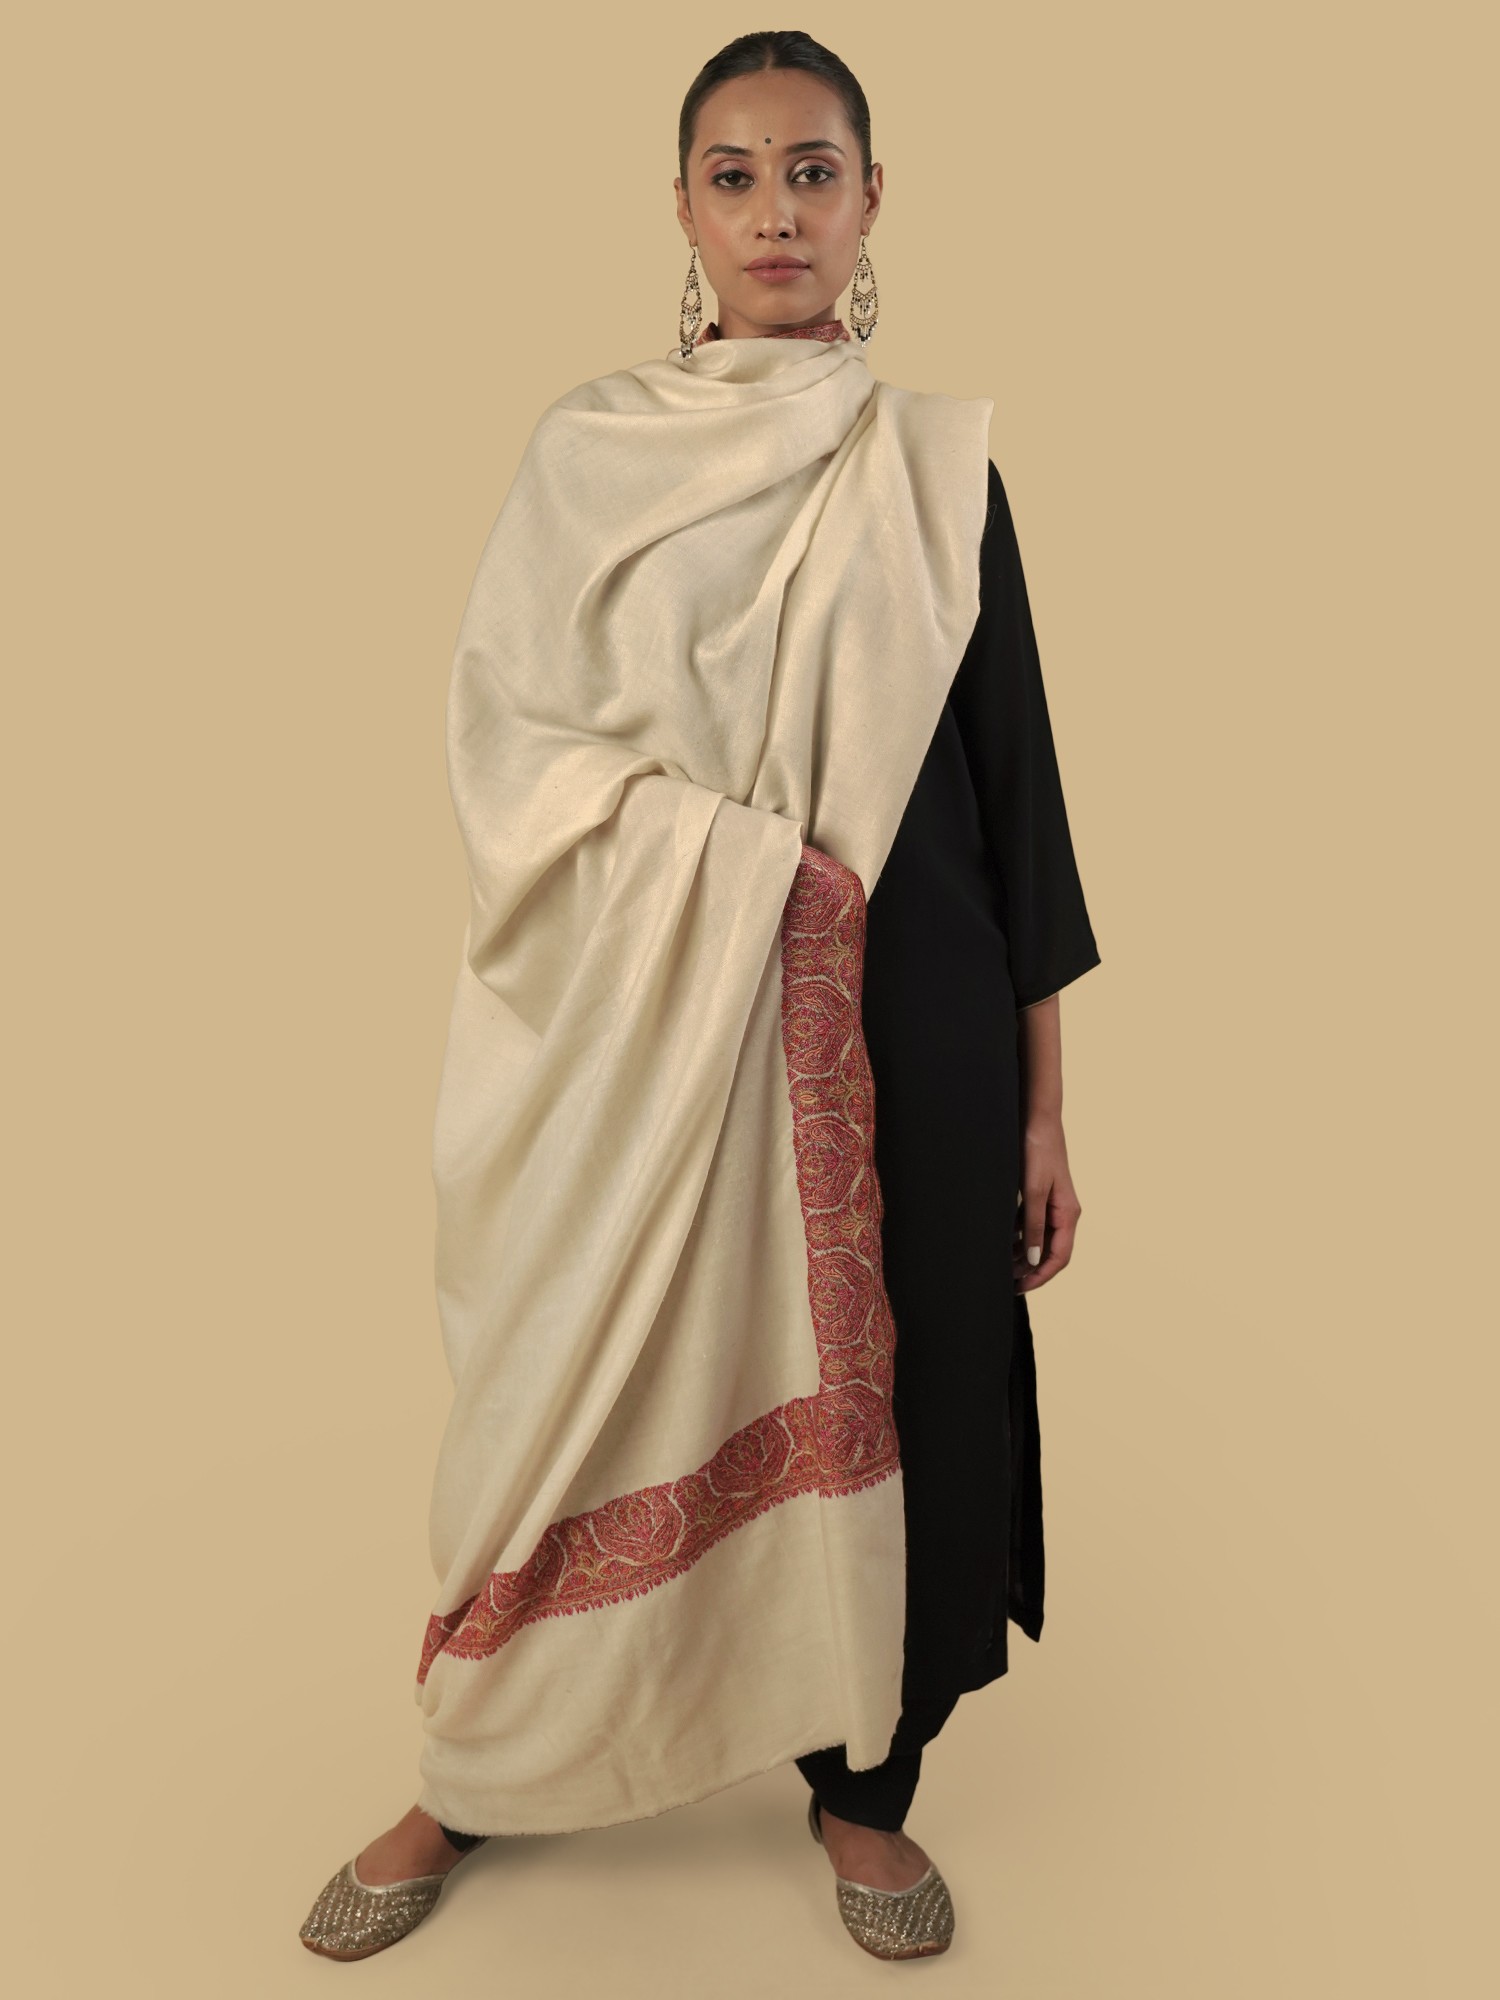 Pearled-Ivory Pure Pashmina Shawl from Kashmir with Soz - Off-White